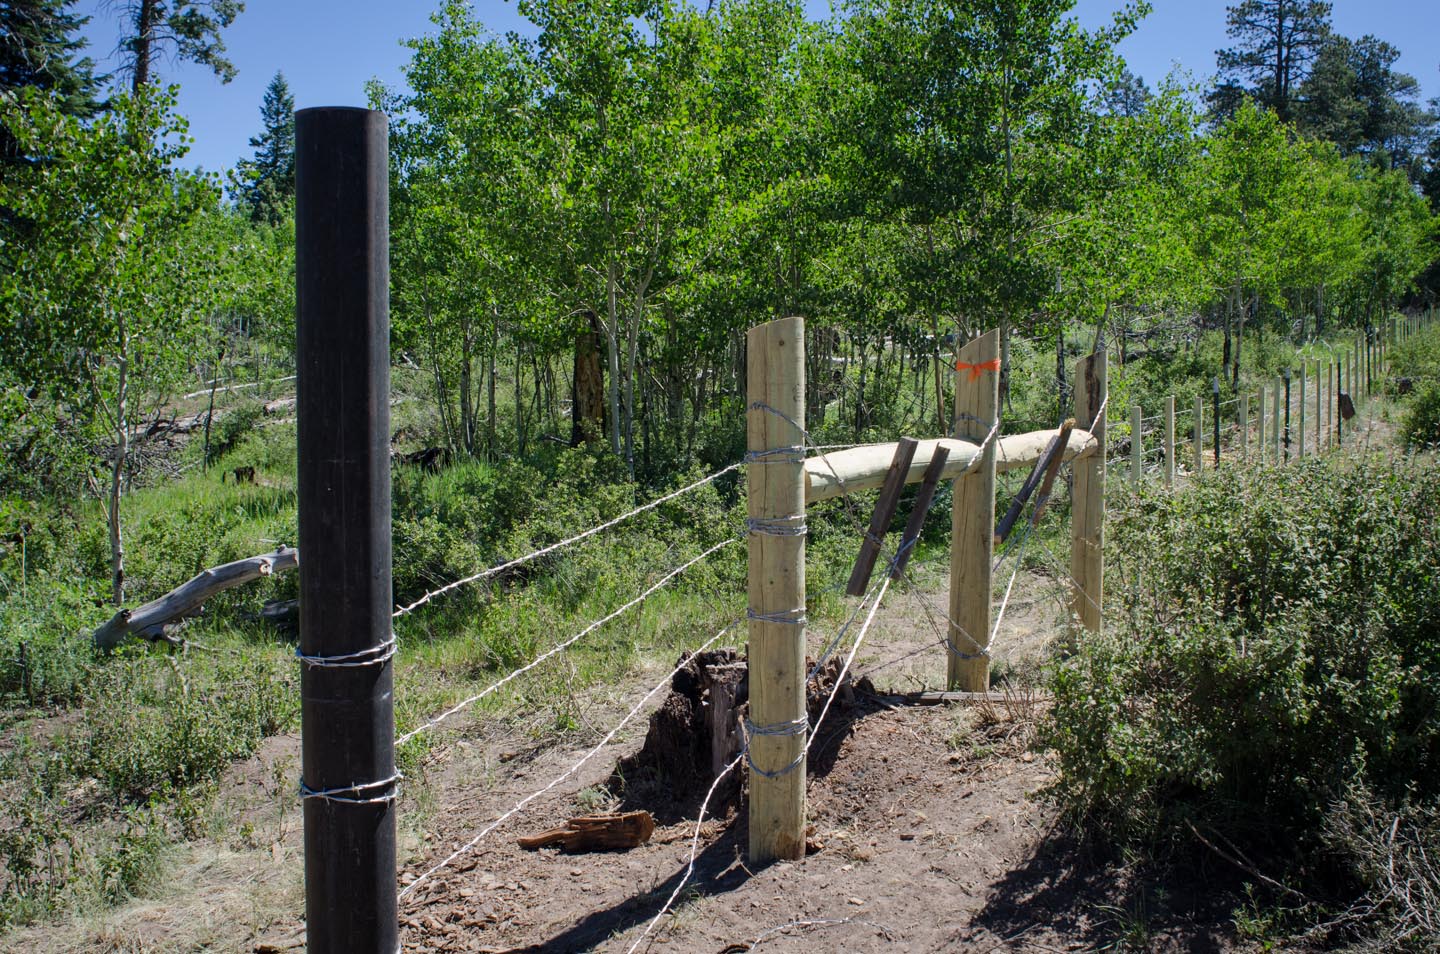 Sections of the new Fence line include gates and cattle guards.